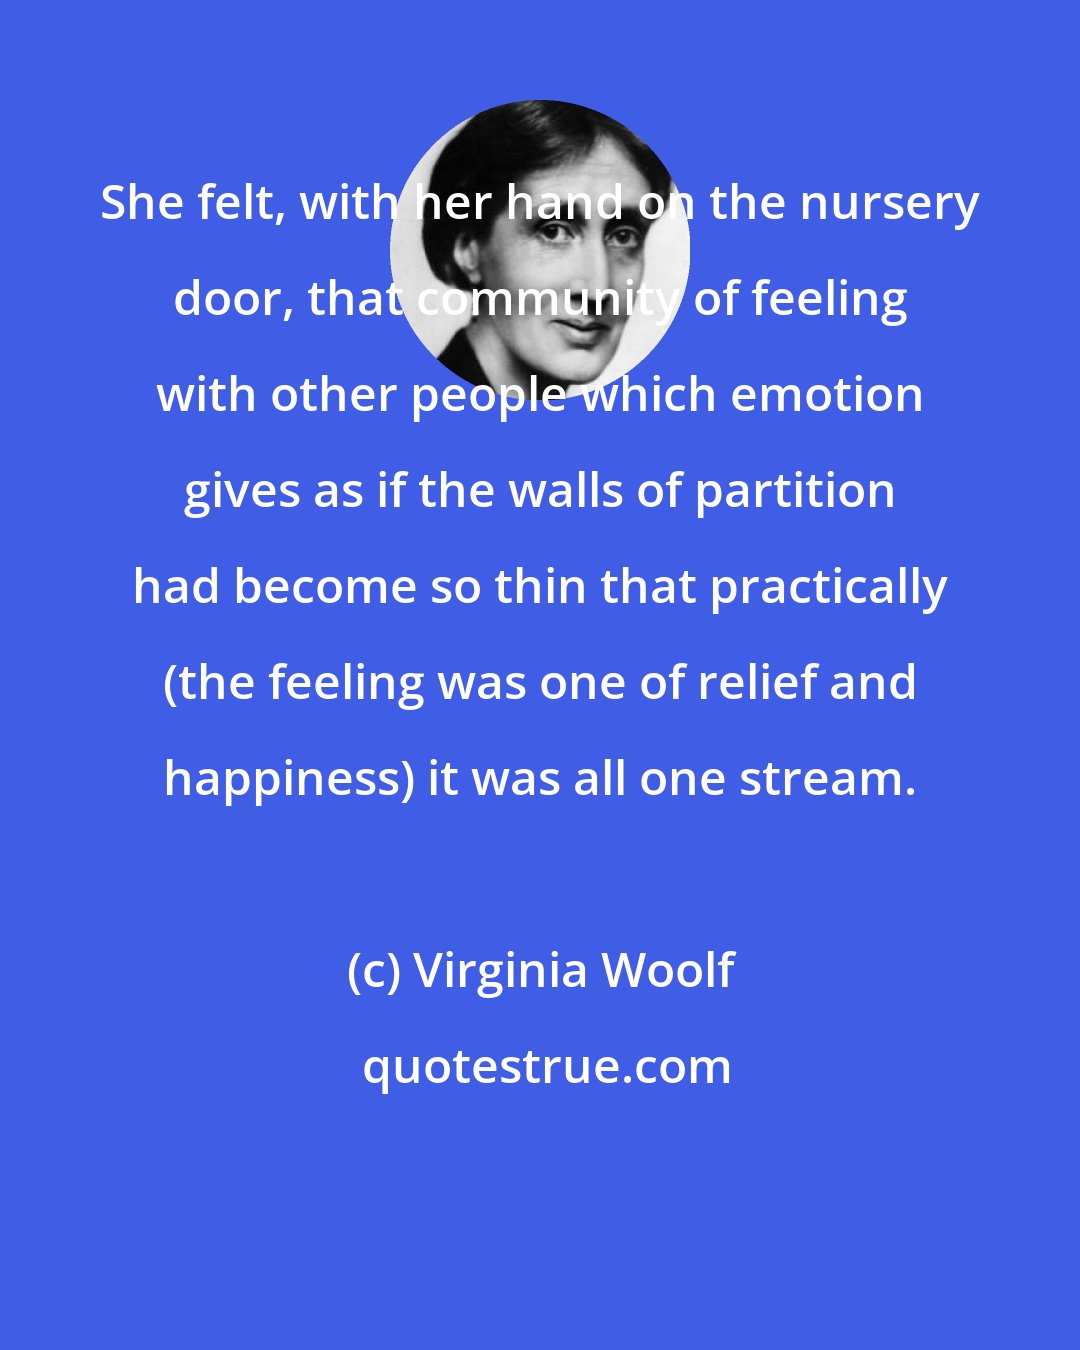 Virginia Woolf: She felt, with her hand on the nursery door, that community of feeling with other people which emotion gives as if the walls of partition had become so thin that practically (the feeling was one of relief and happiness) it was all one stream.